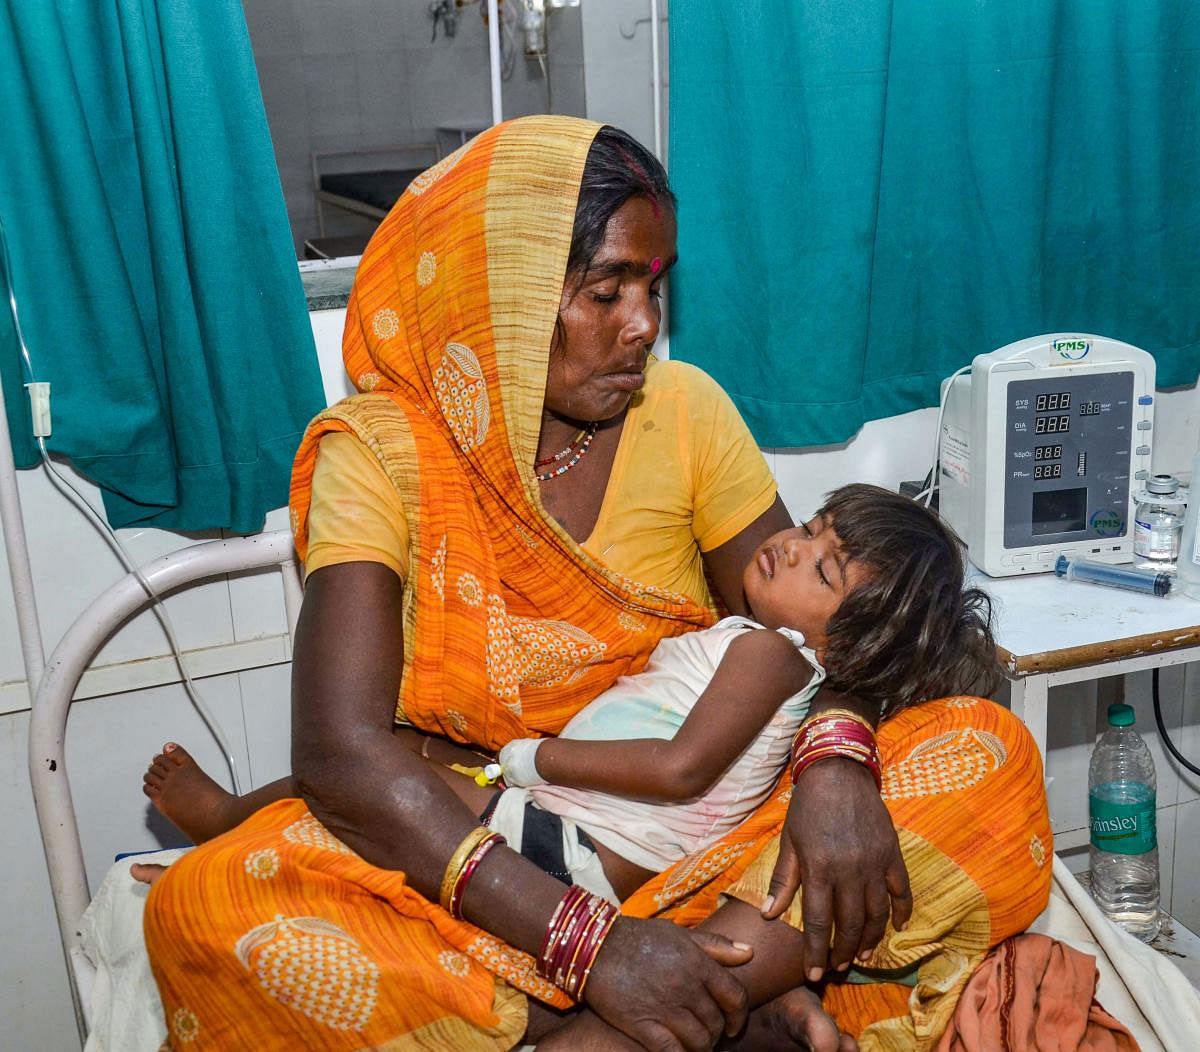 A child showing symptoms of Acute Encephalitis Syndrome (AES) being treated at a hospital in Muzaffarpur, Friday, June 21, 2019. AES which has claimed more than 100 lives in Bihar's Muzaffarpur region, is a serious neurological illness that causes inflammation of the brain. (PTI Photo)